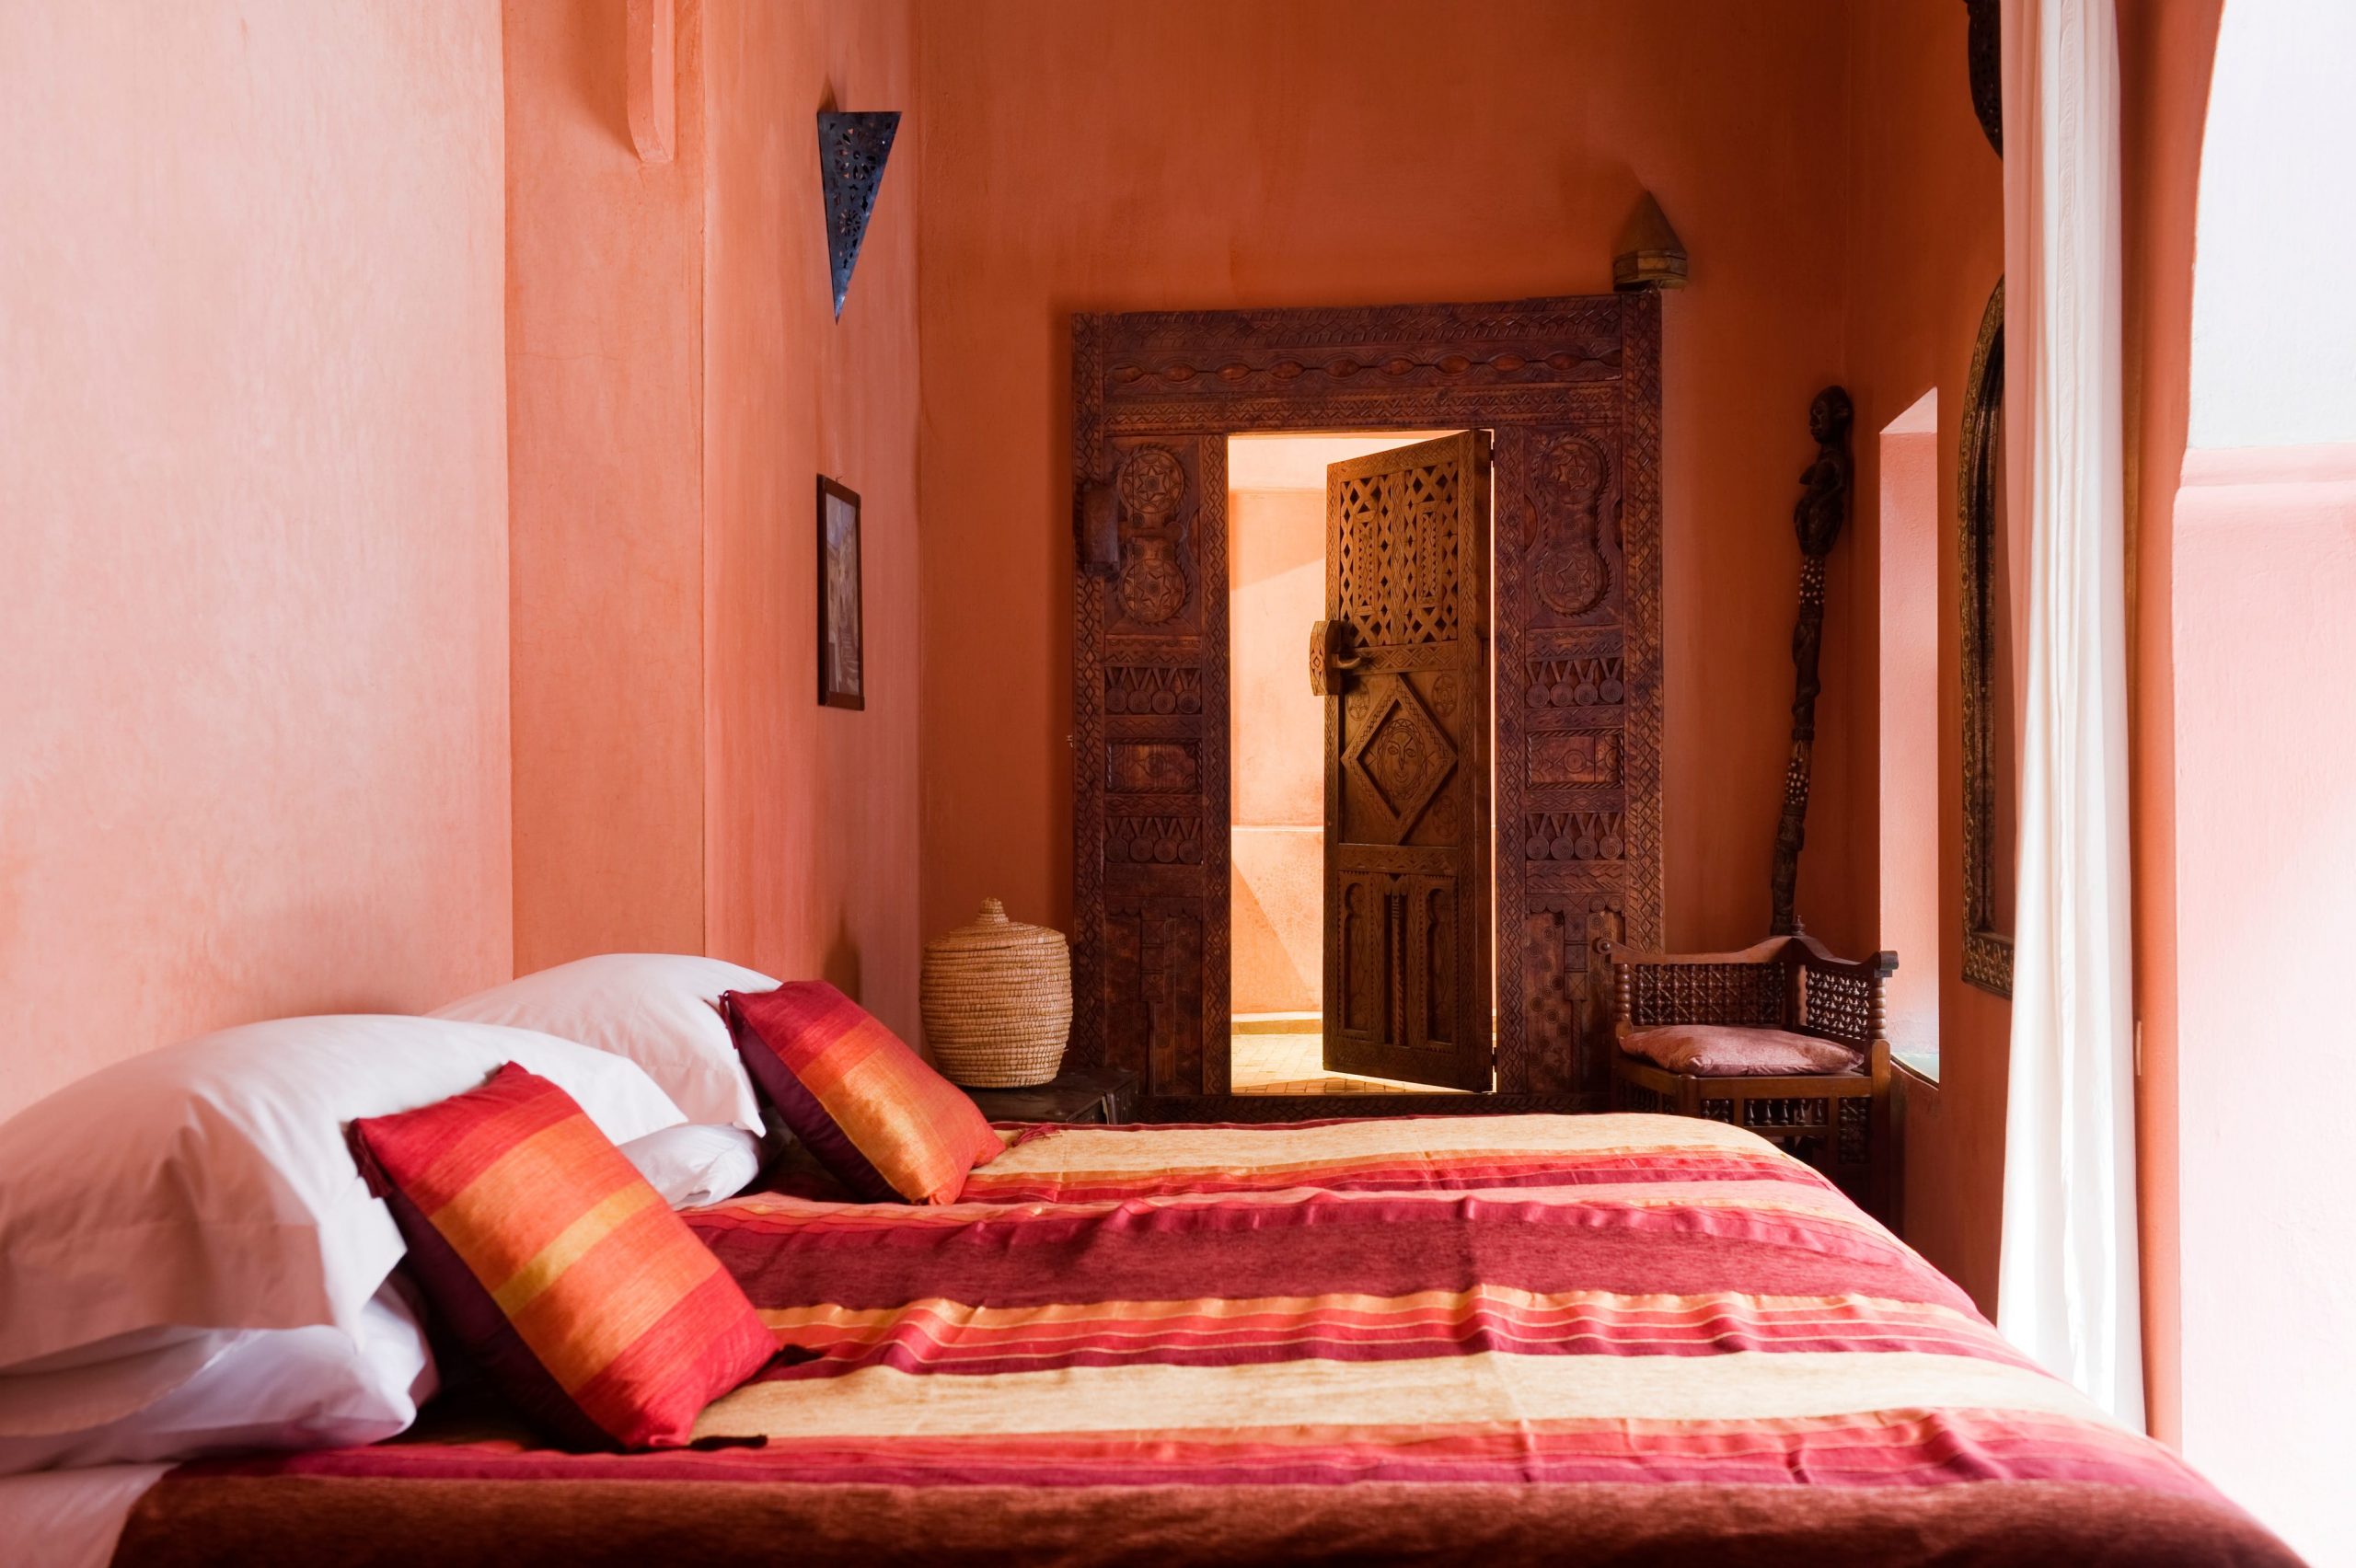 A sandy pink-painted bedroom with two beds adorned in pink, red, and orange linen.